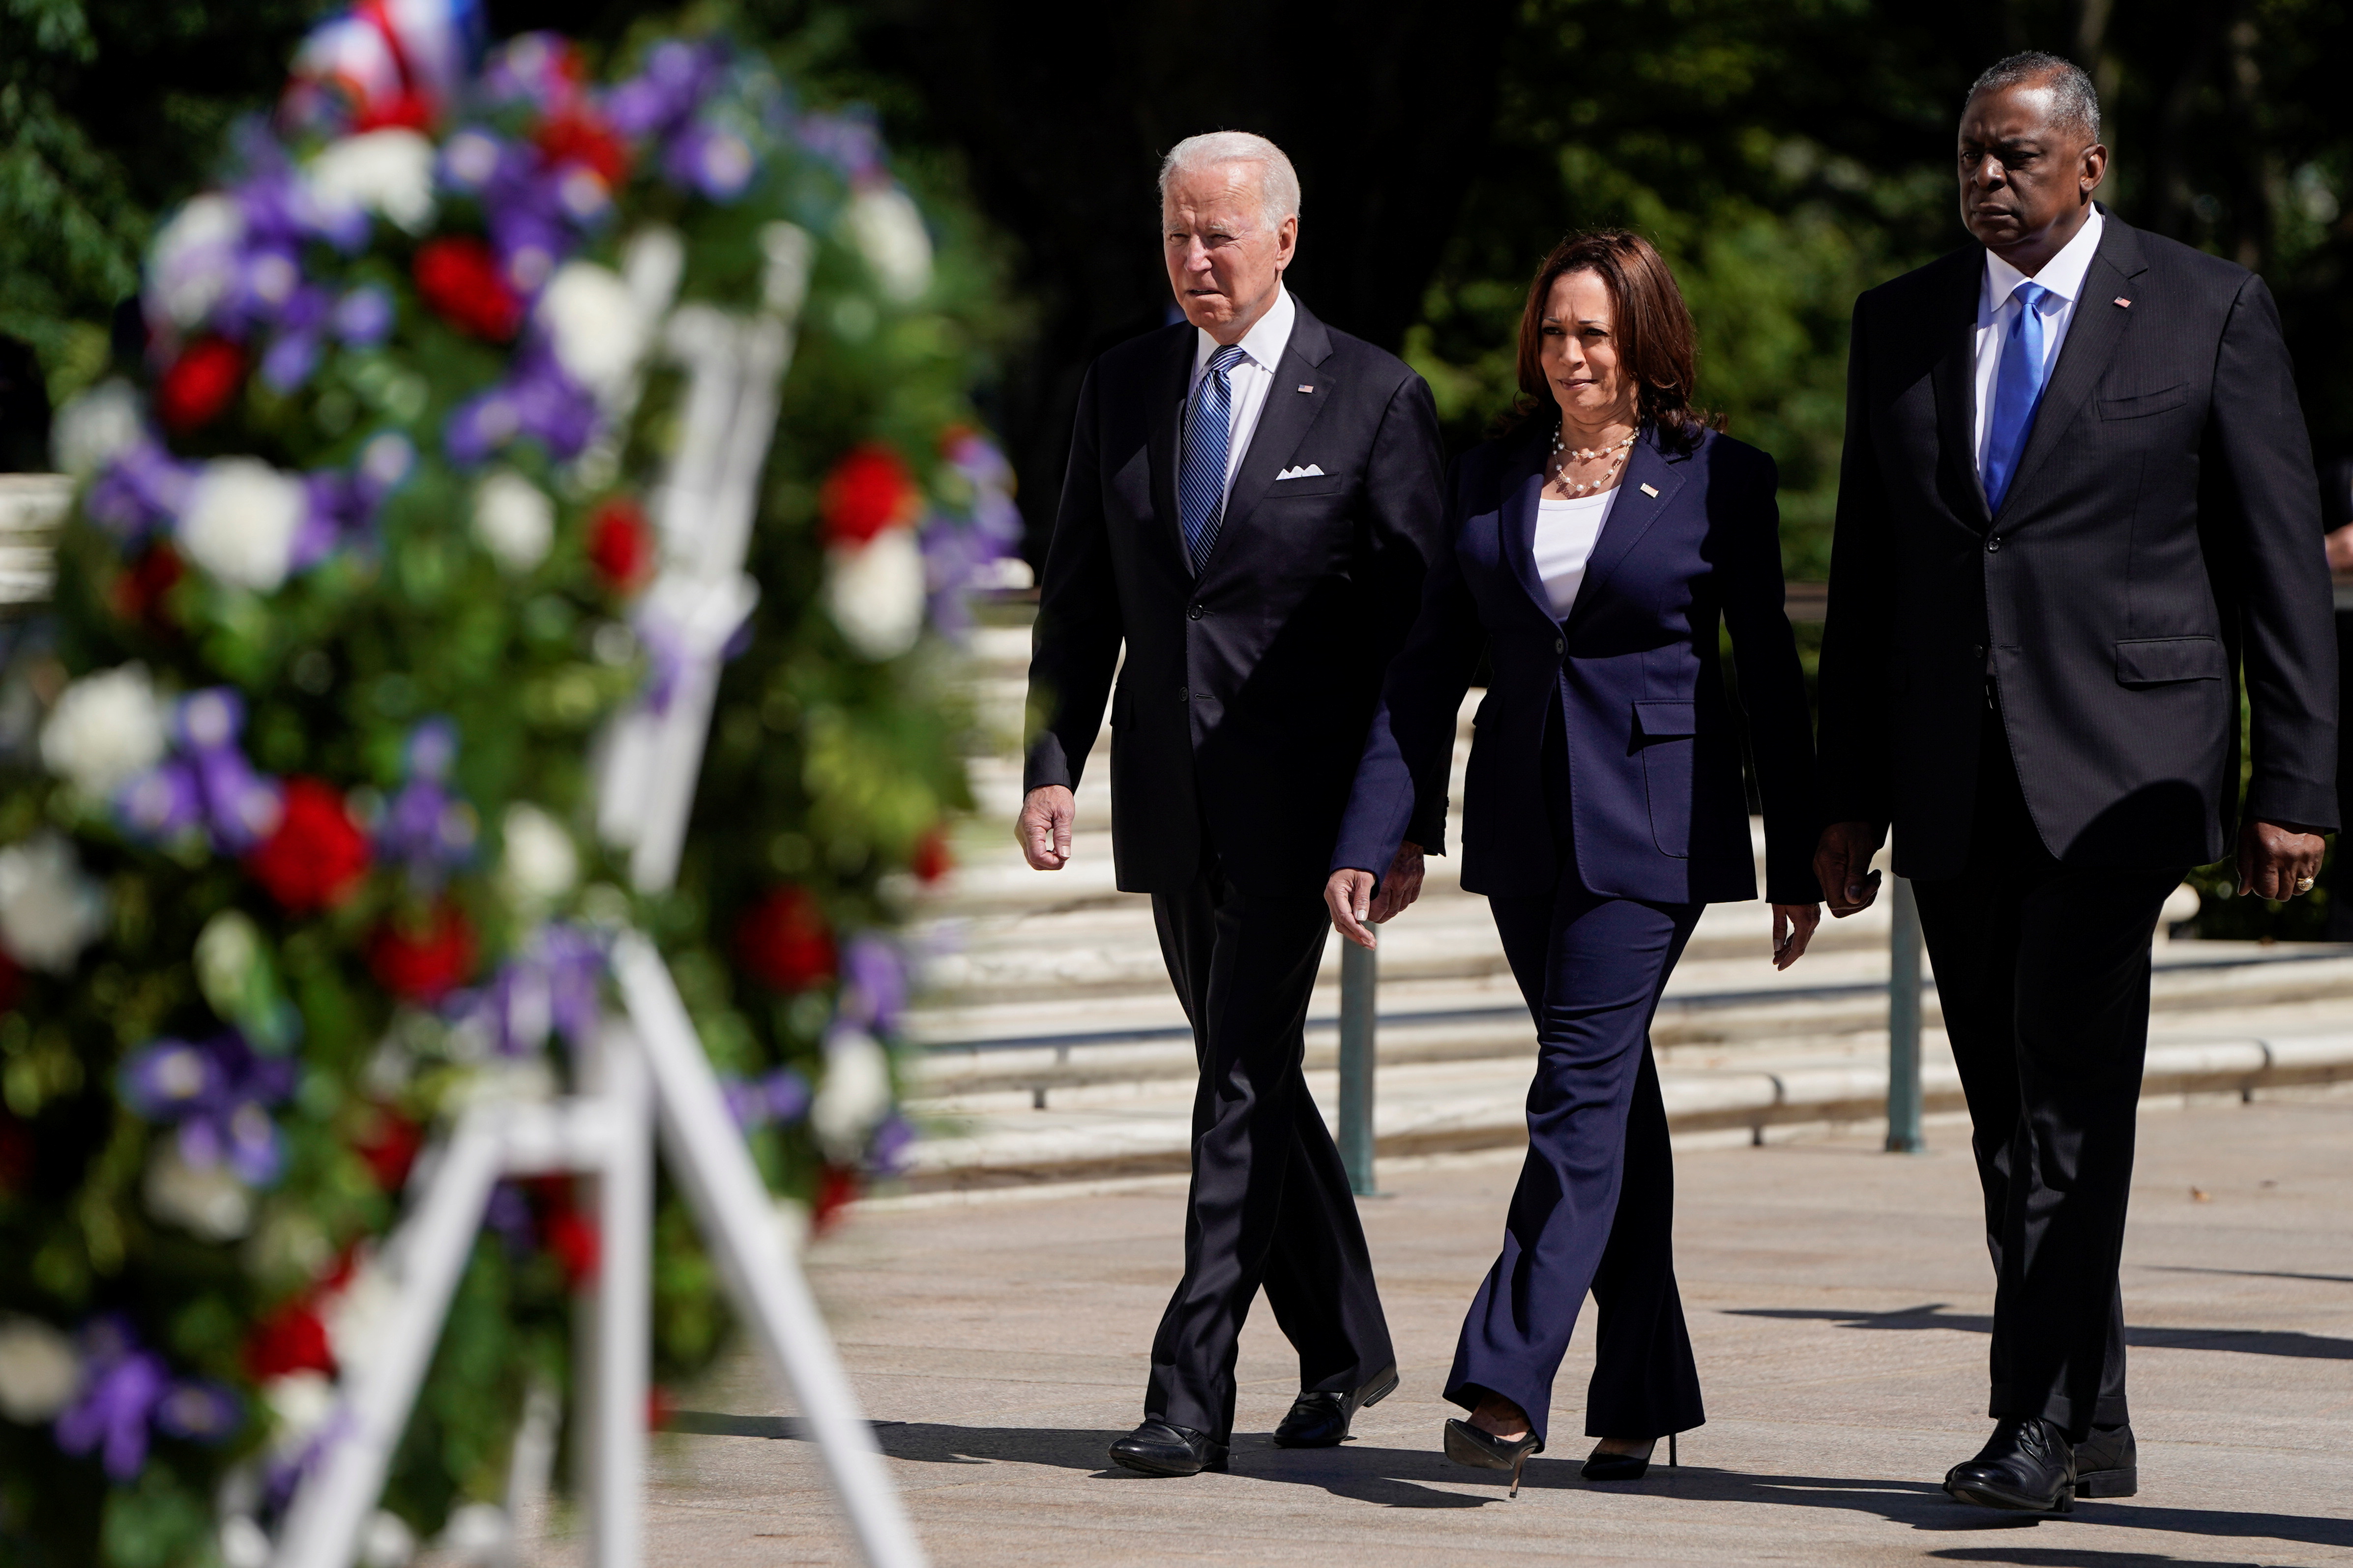 U.S. President Joe Biden takes part in a wreath-laying ceremony at Arlington National Cemetery in Arlington